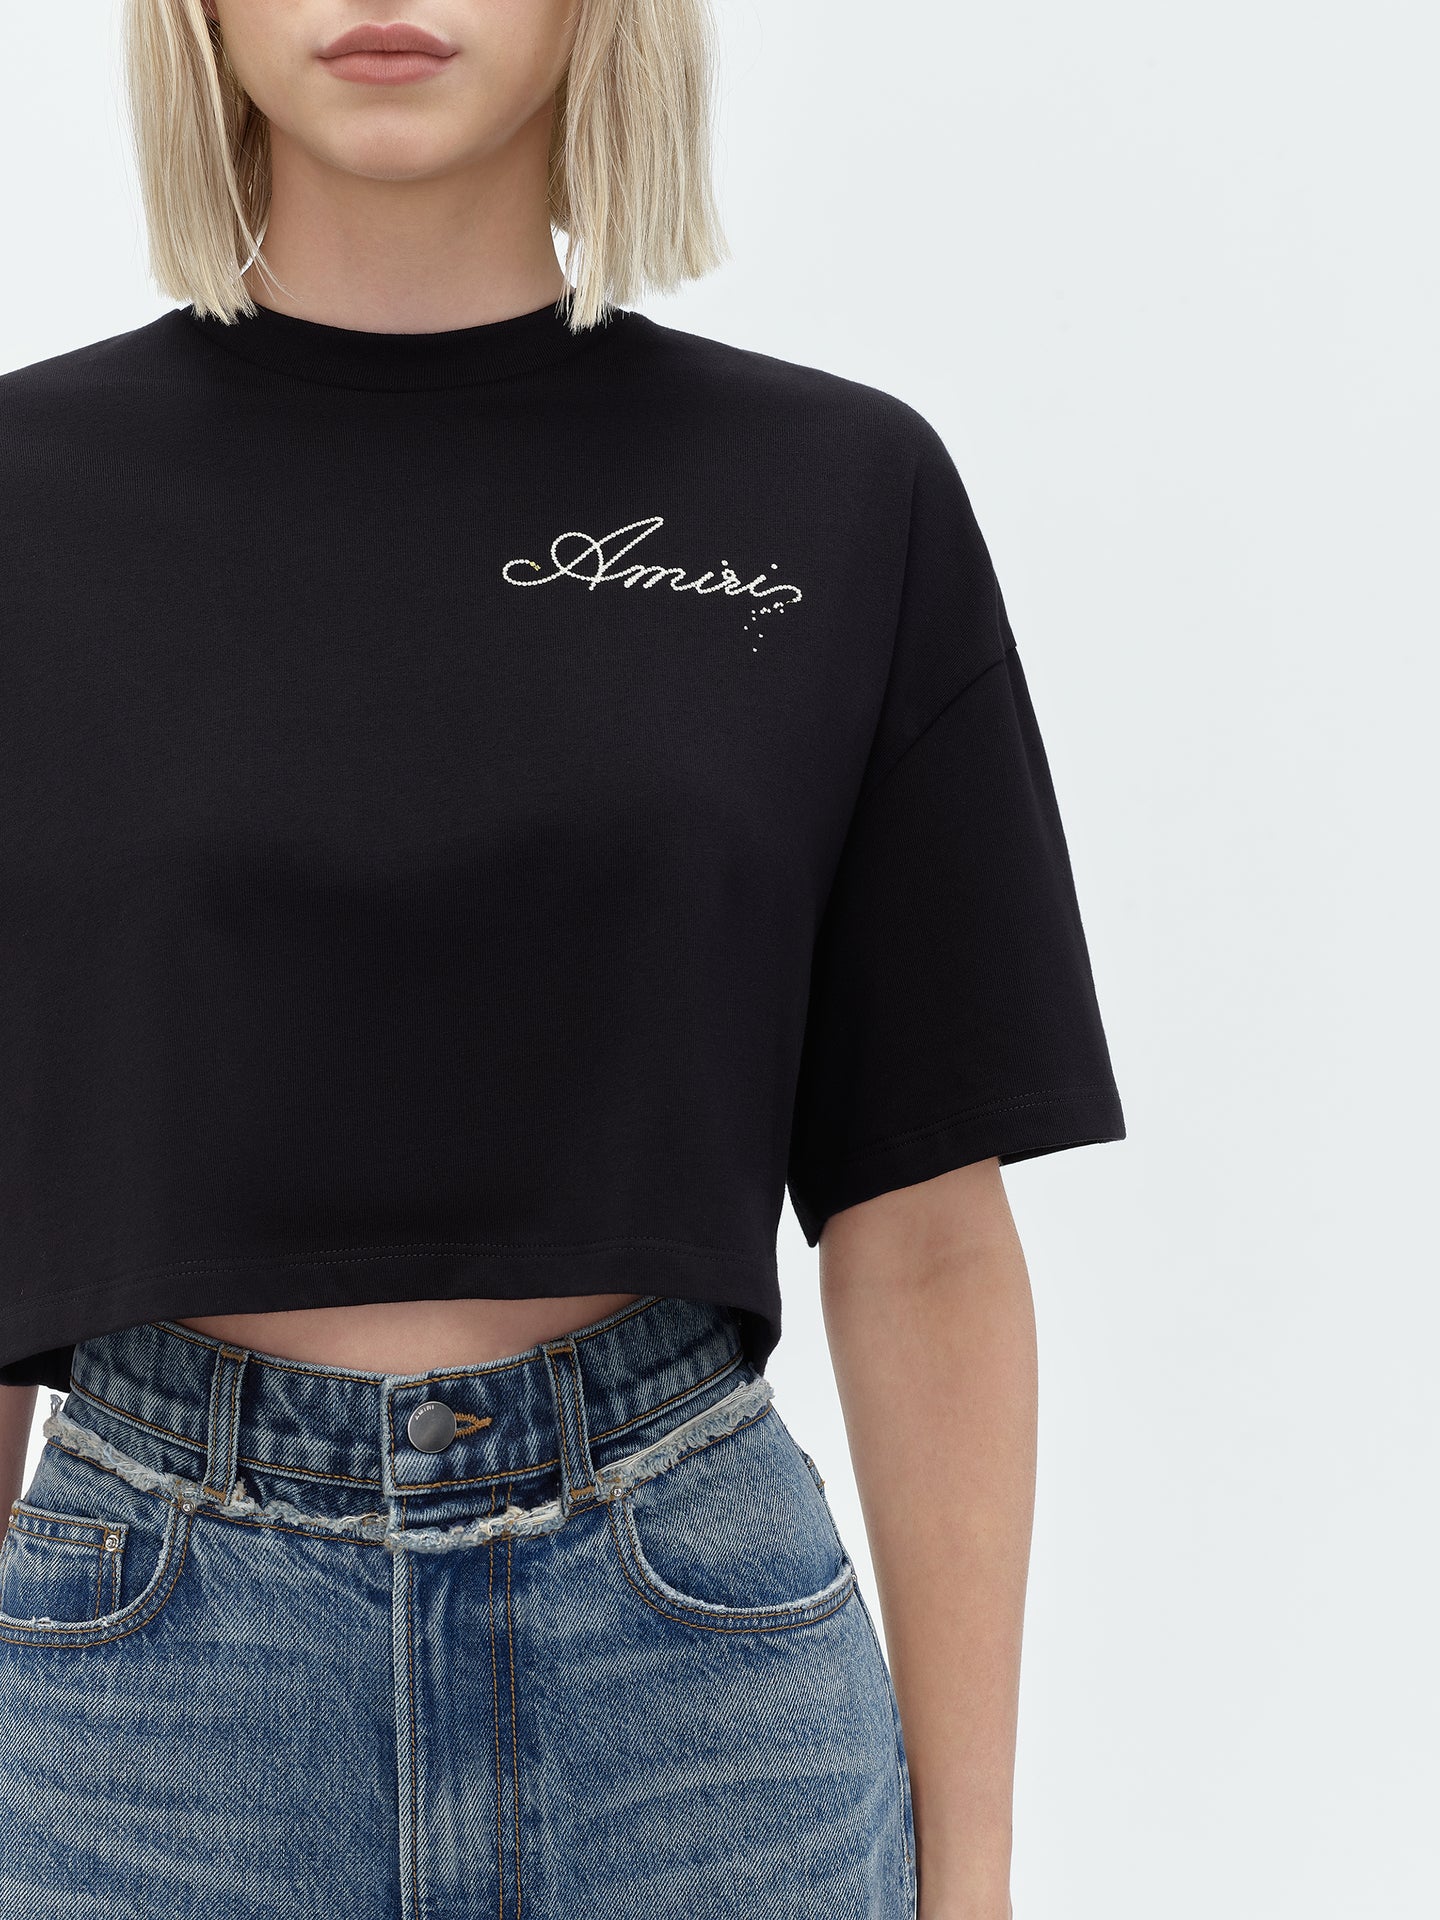 WOMEN - CHAMPAGNE CROPPED TEE - Black